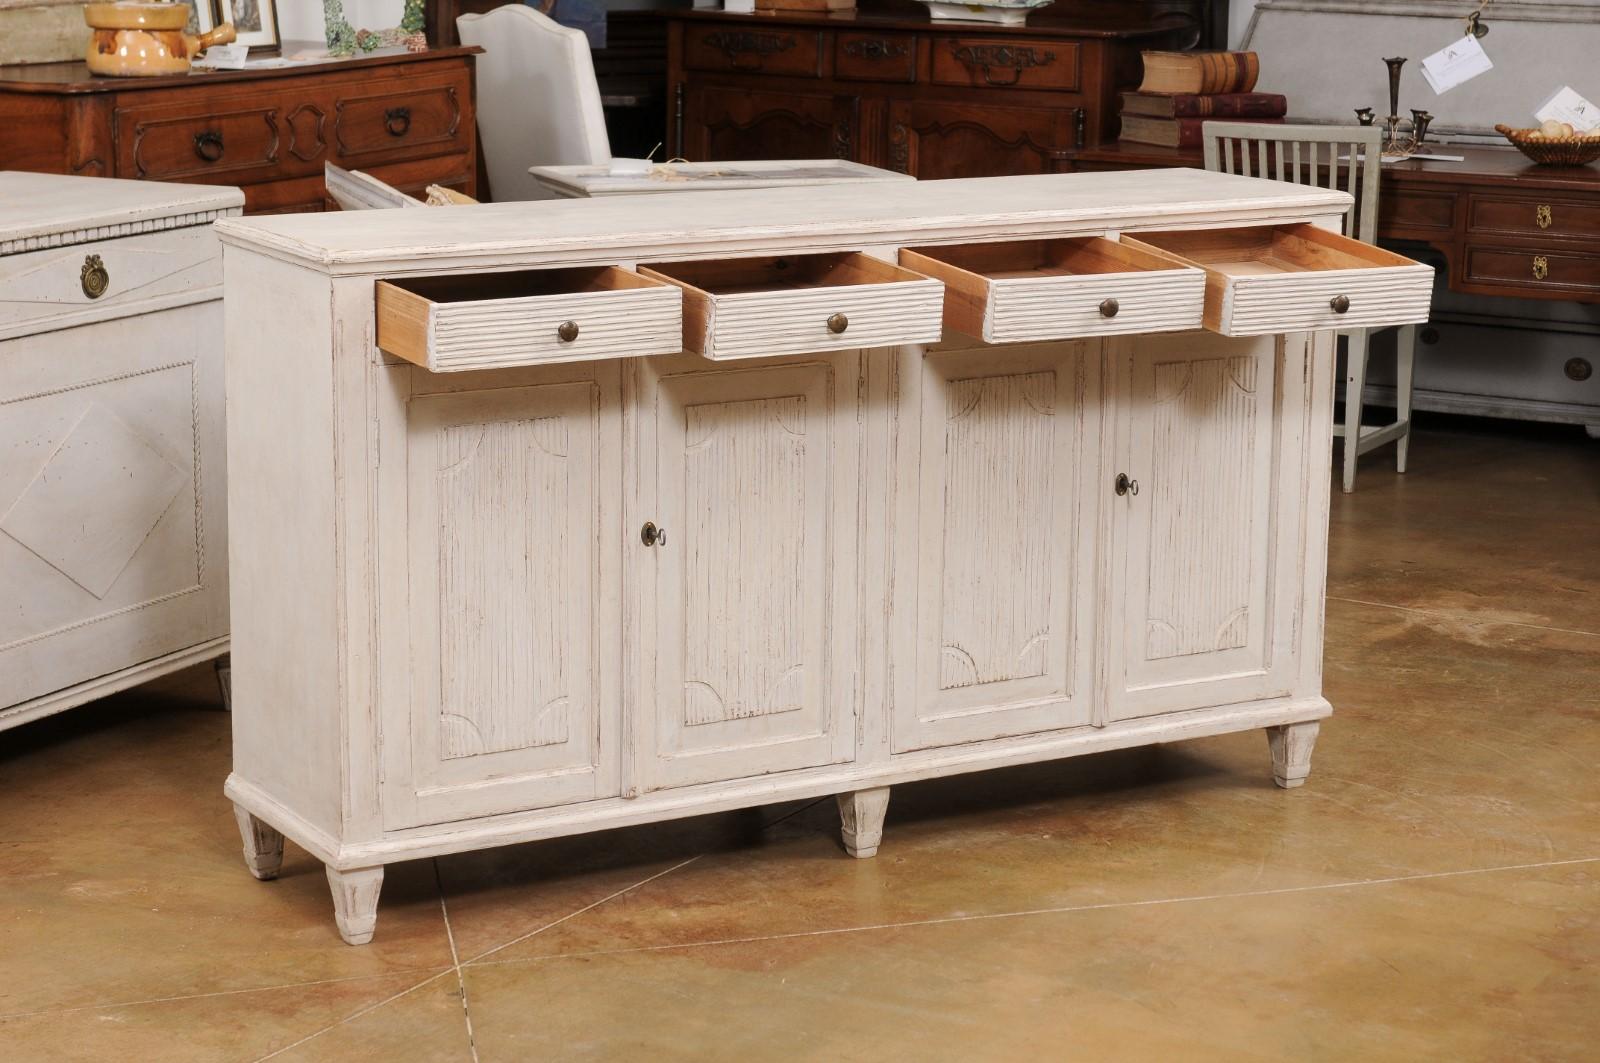 Swedish Gustavian Style 19th Century Painted Sideboard with Doors and Drawers In Good Condition For Sale In Atlanta, GA